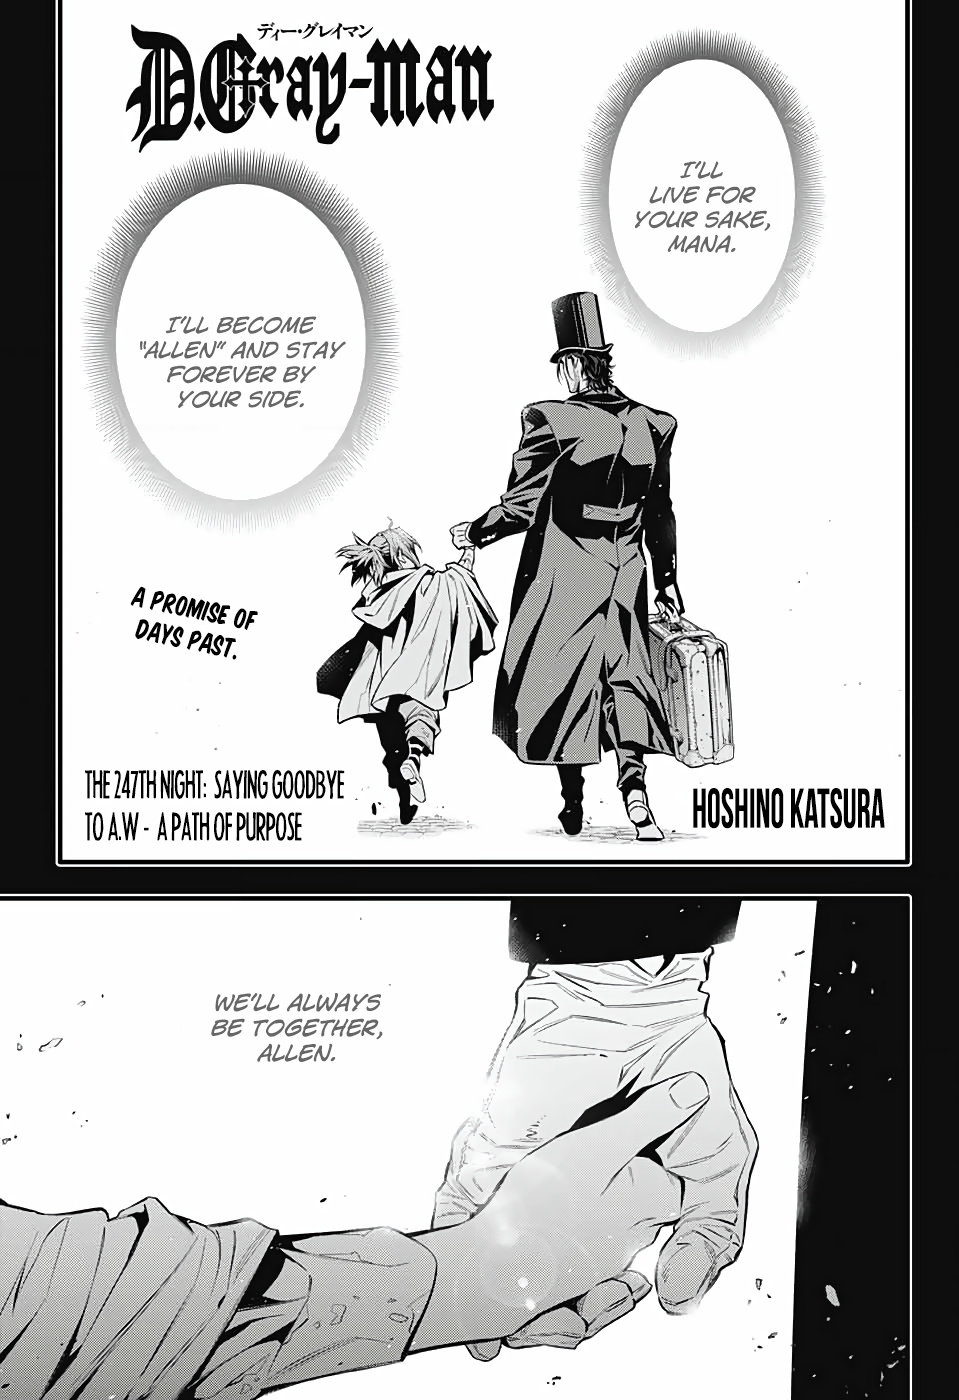 D.gray-Man Chapter 247: Saying Goodbye To A.w - A Path Of Purpose - Picture 2